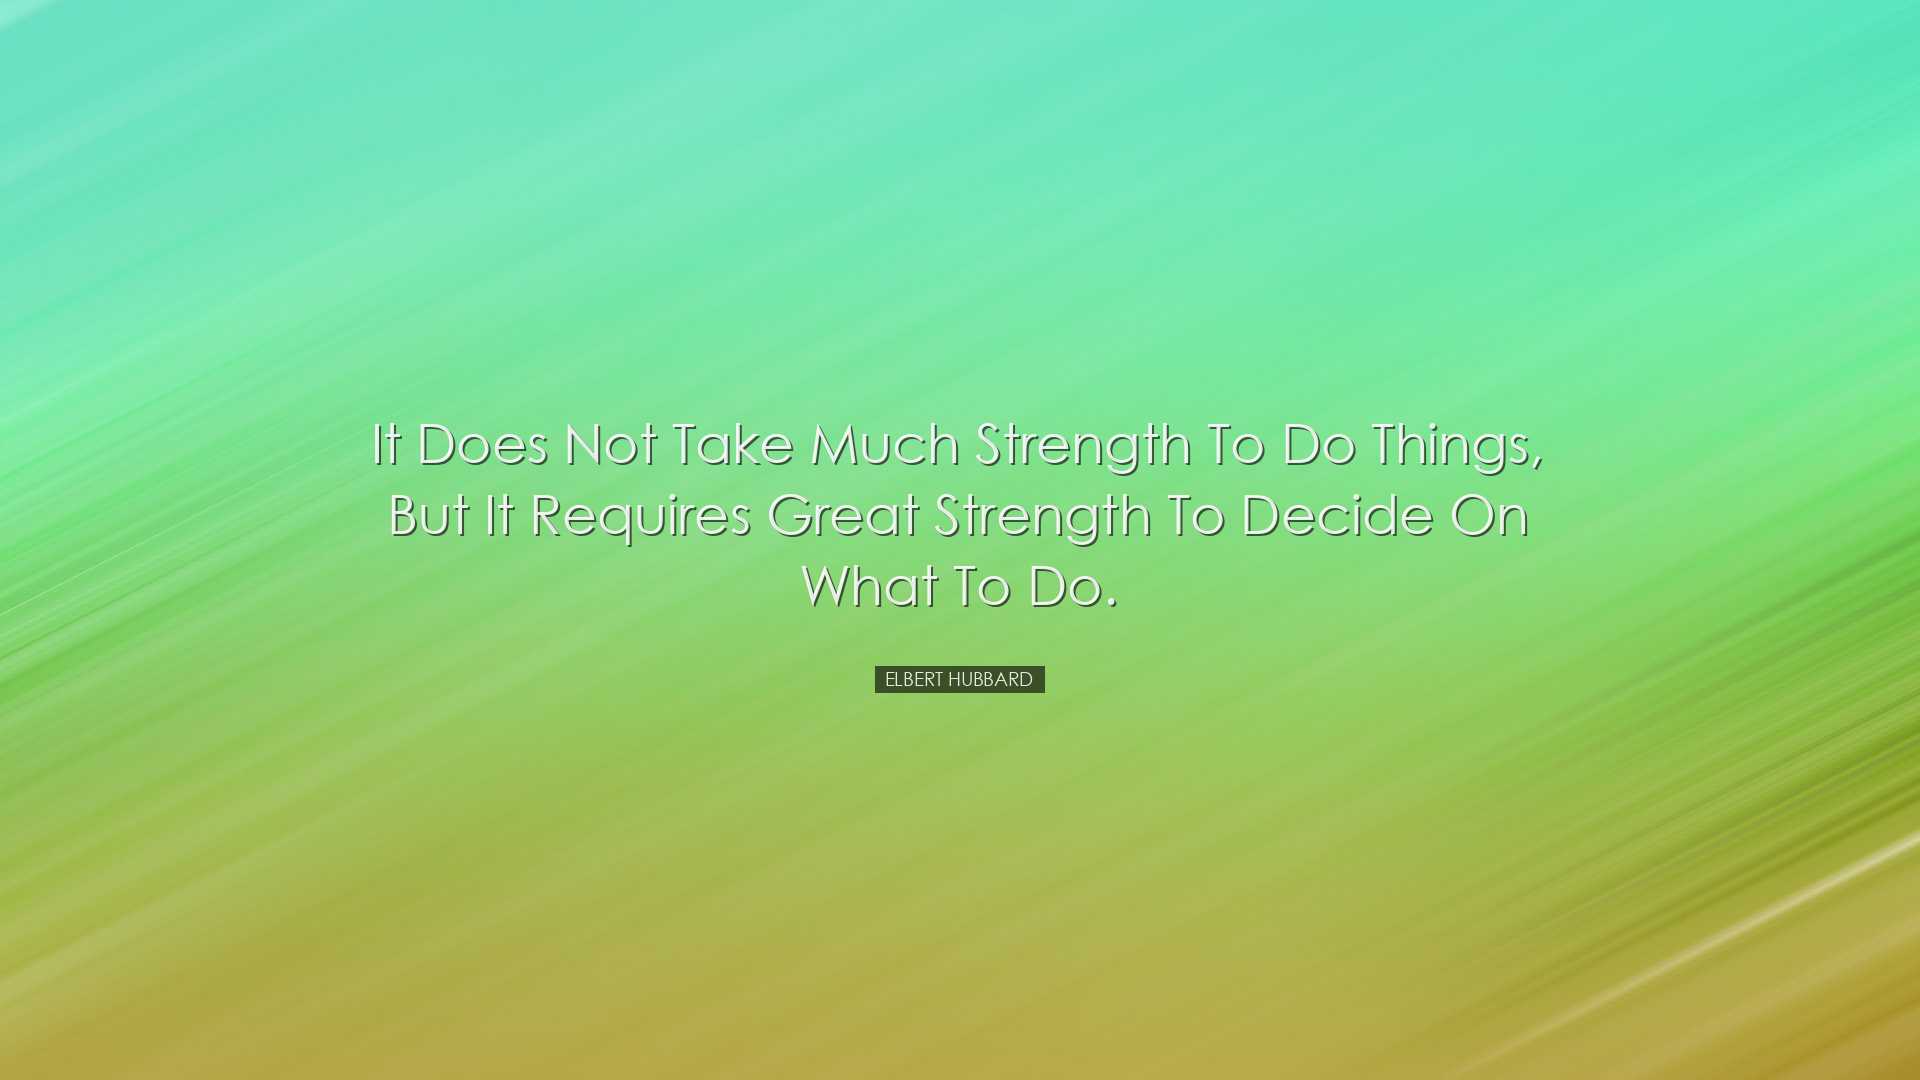 It does not take much strength to do things, but it requires great